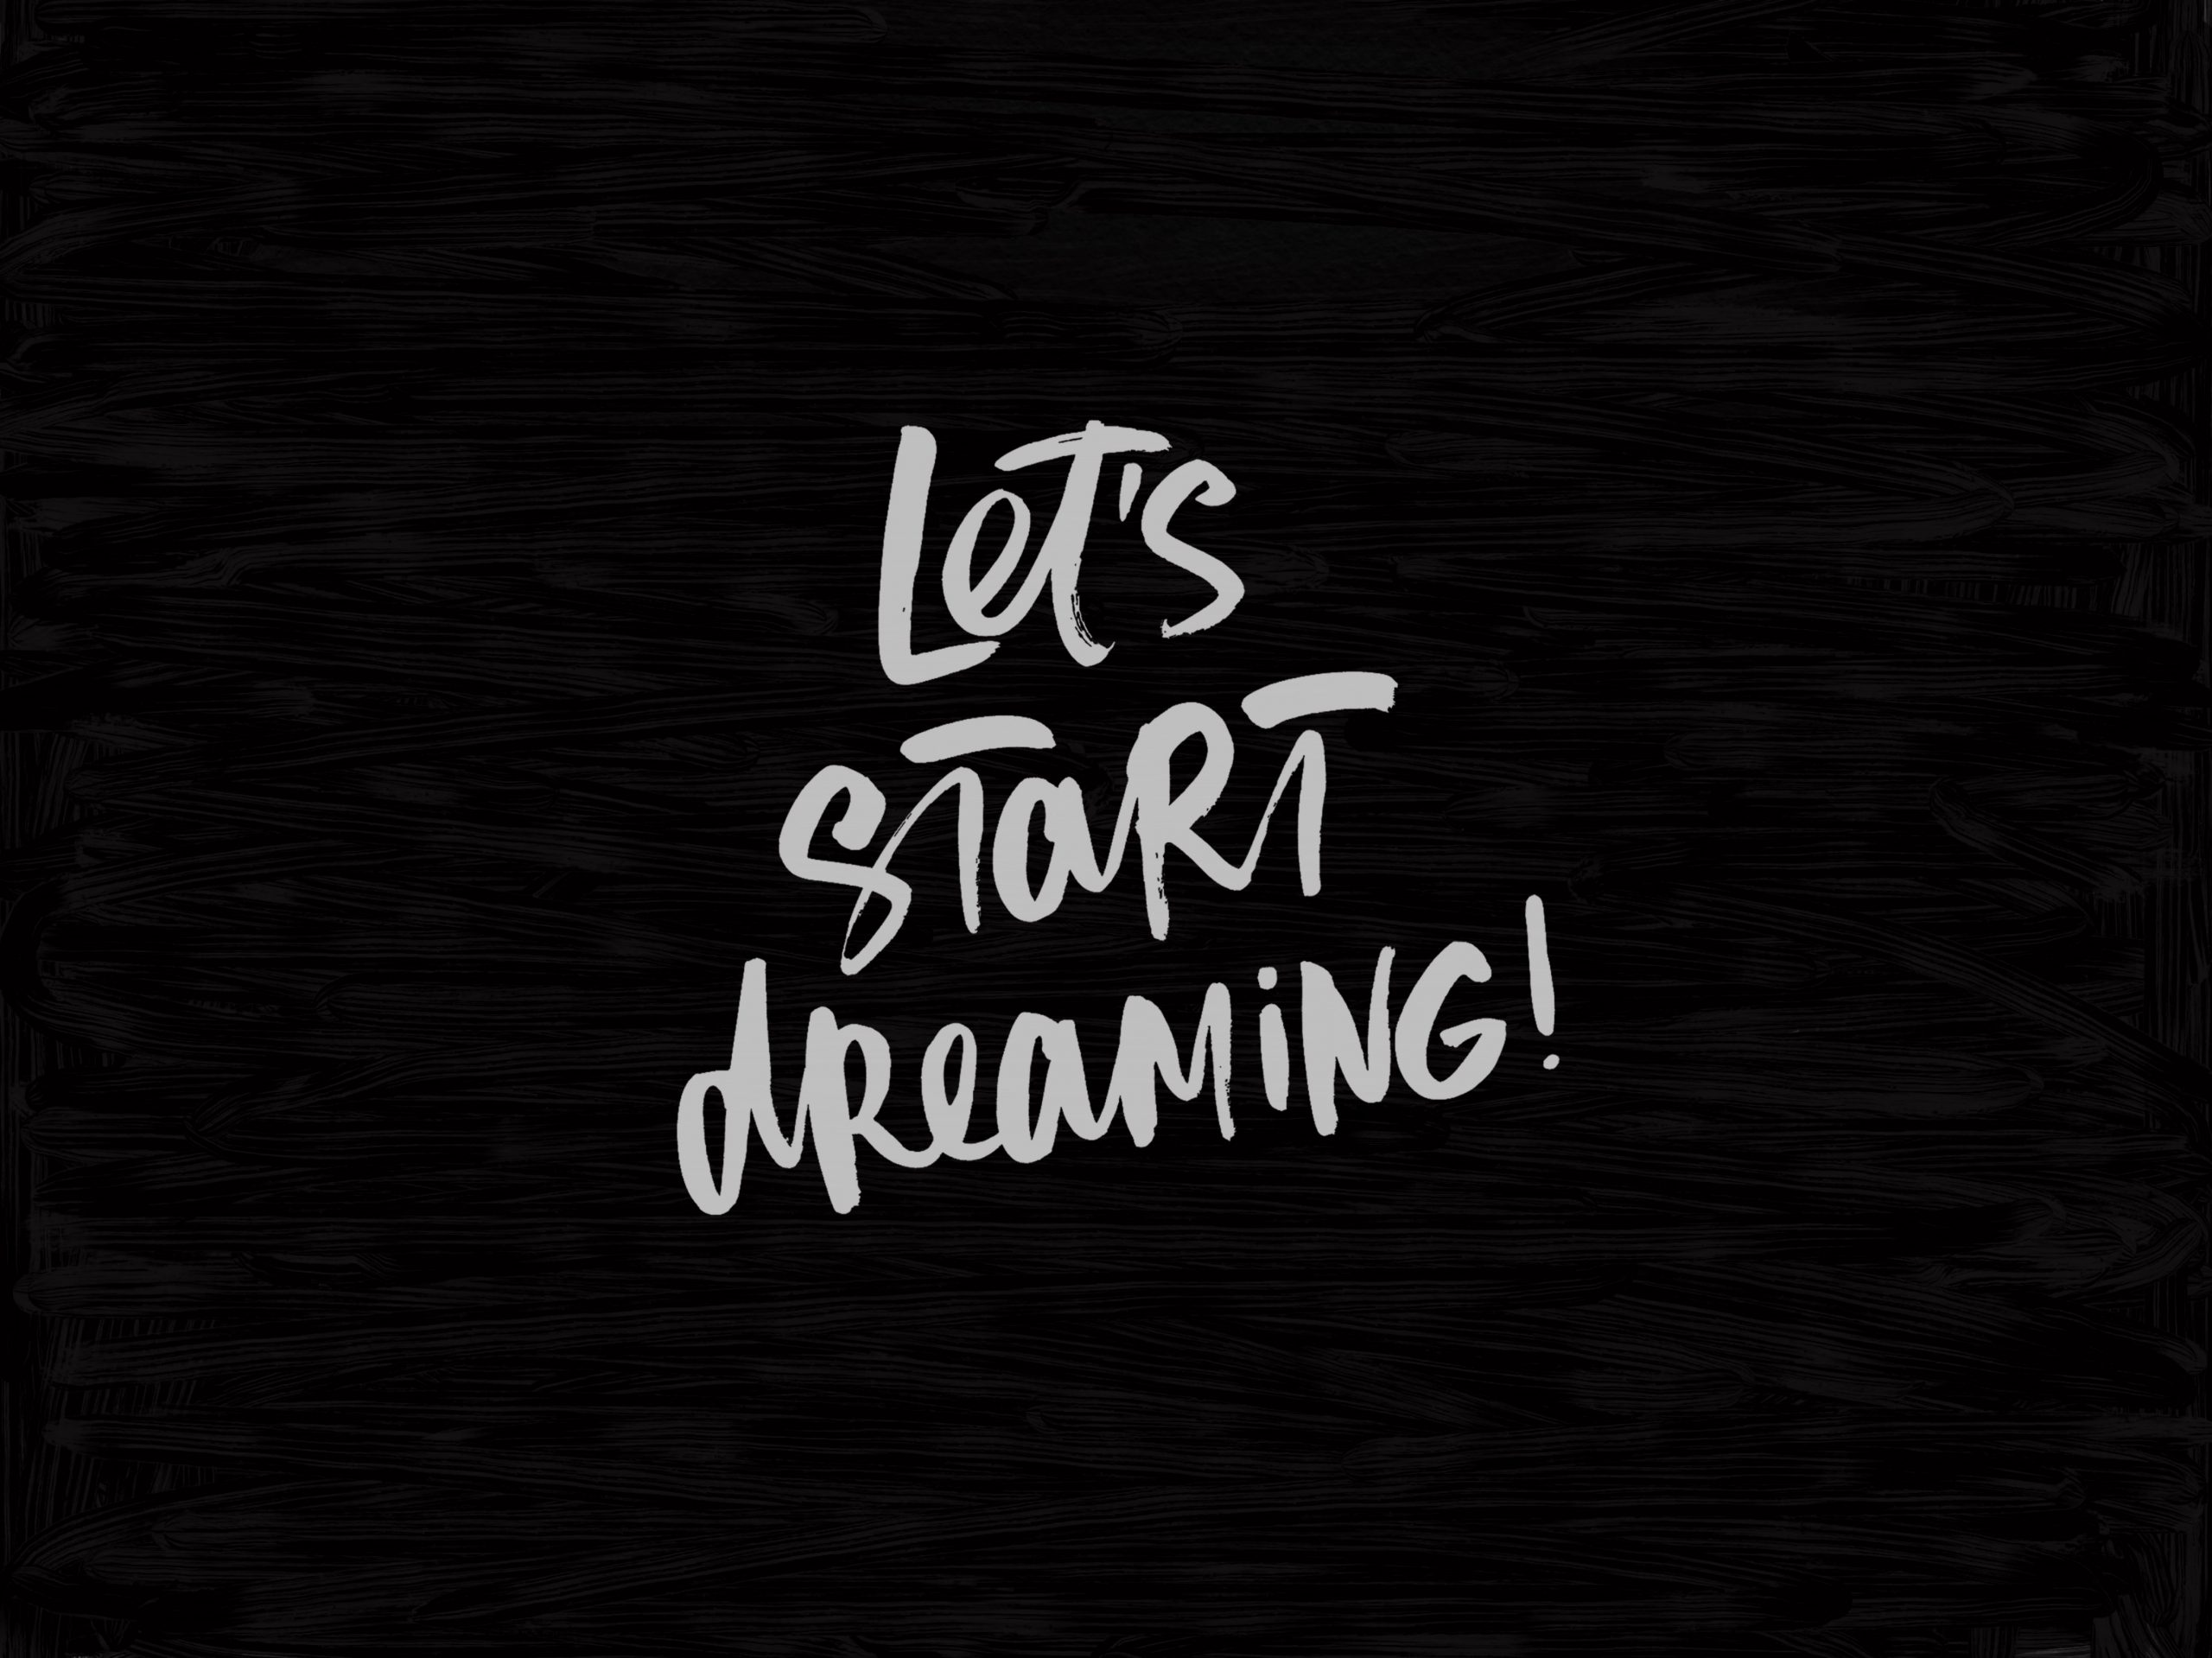 Wallpaper Black Background With Let's Start Dreaming Text - Wallpaperforu